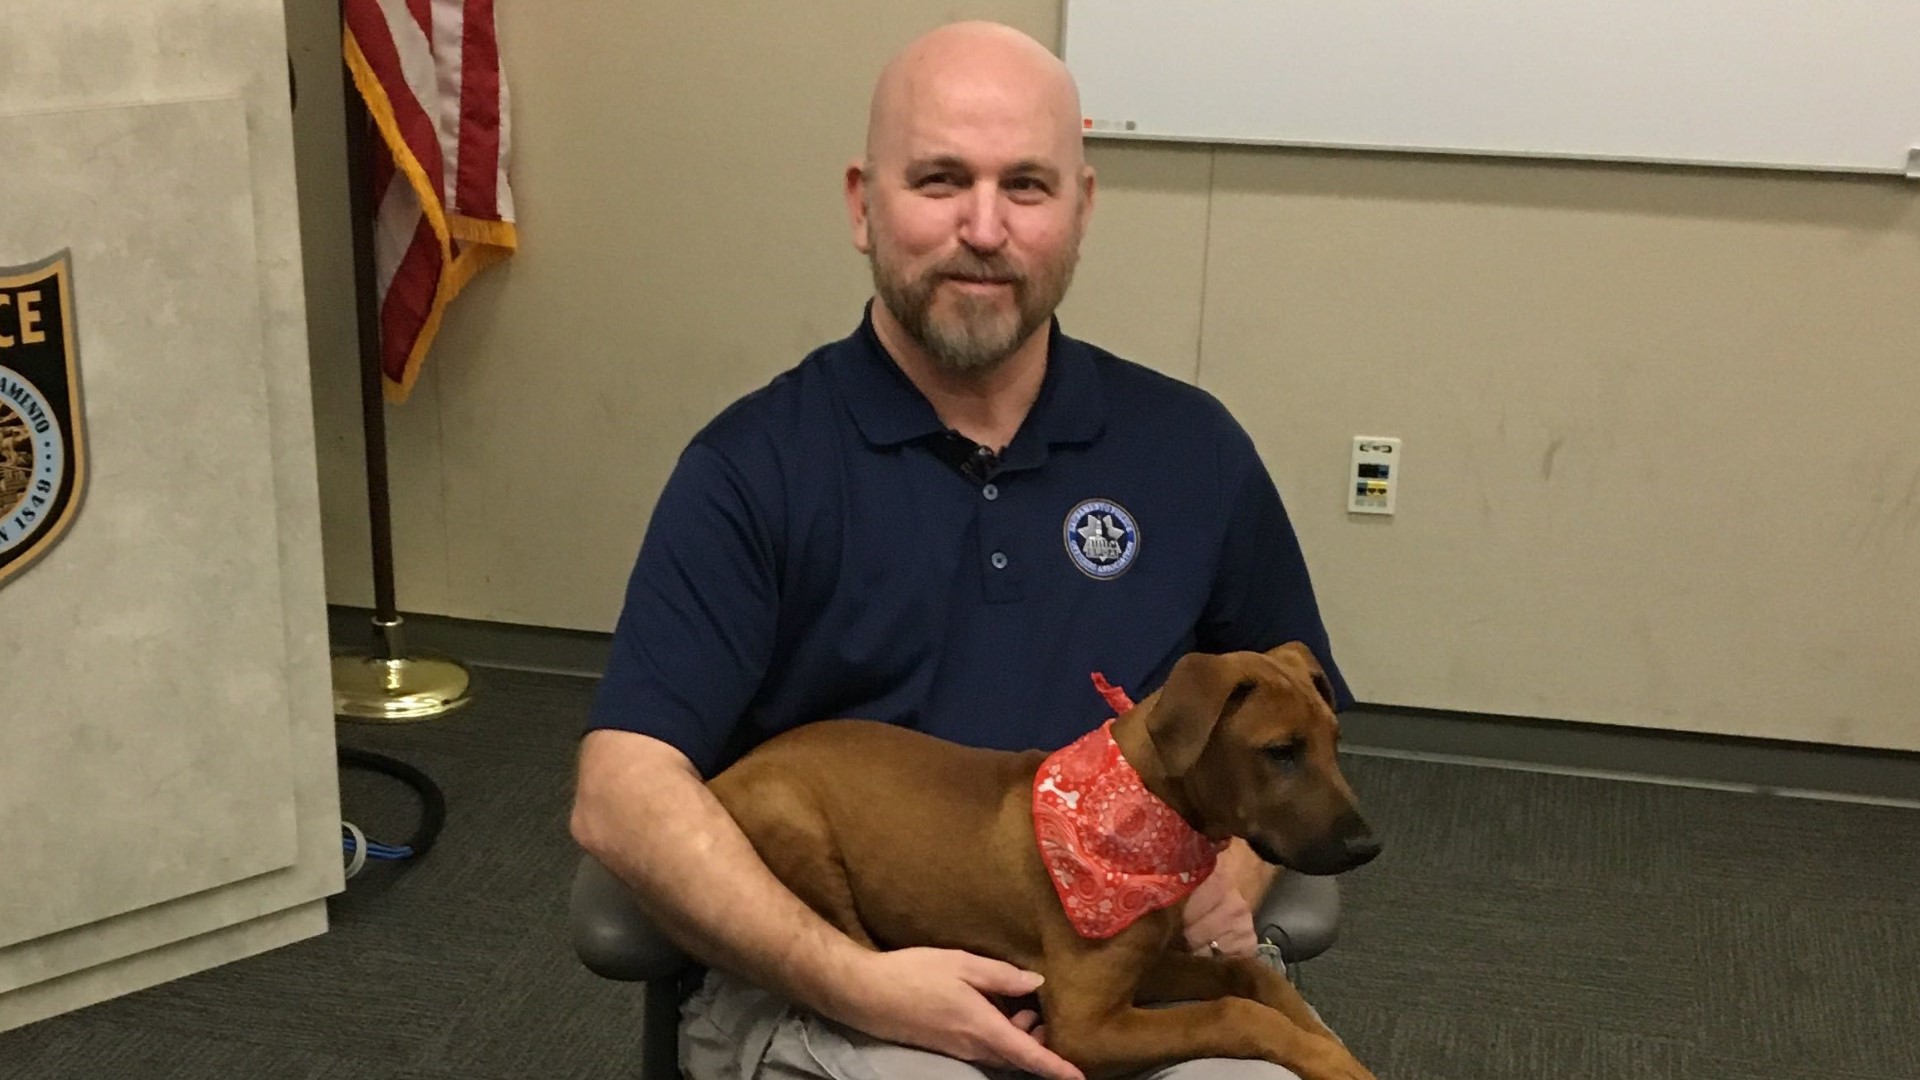 Shawn is a Sacramento police dispatcher who was on the radio channel when Officer Tara O'Sulllivan was killed. In the wake of her death, he's finding comfort once again with the help of a shelter dog.